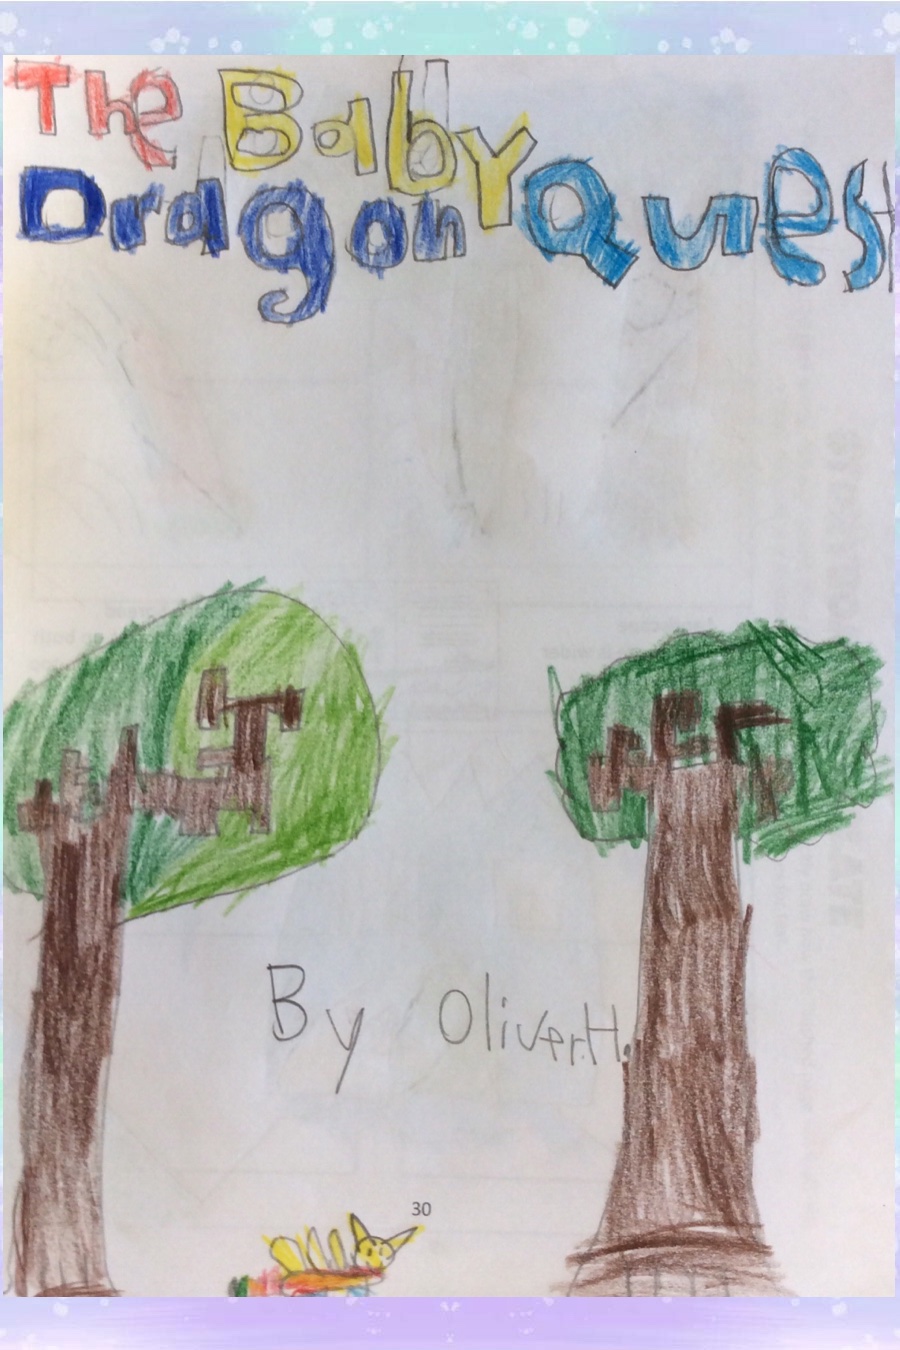 The Baby Dragon’s Quest By Oliver H